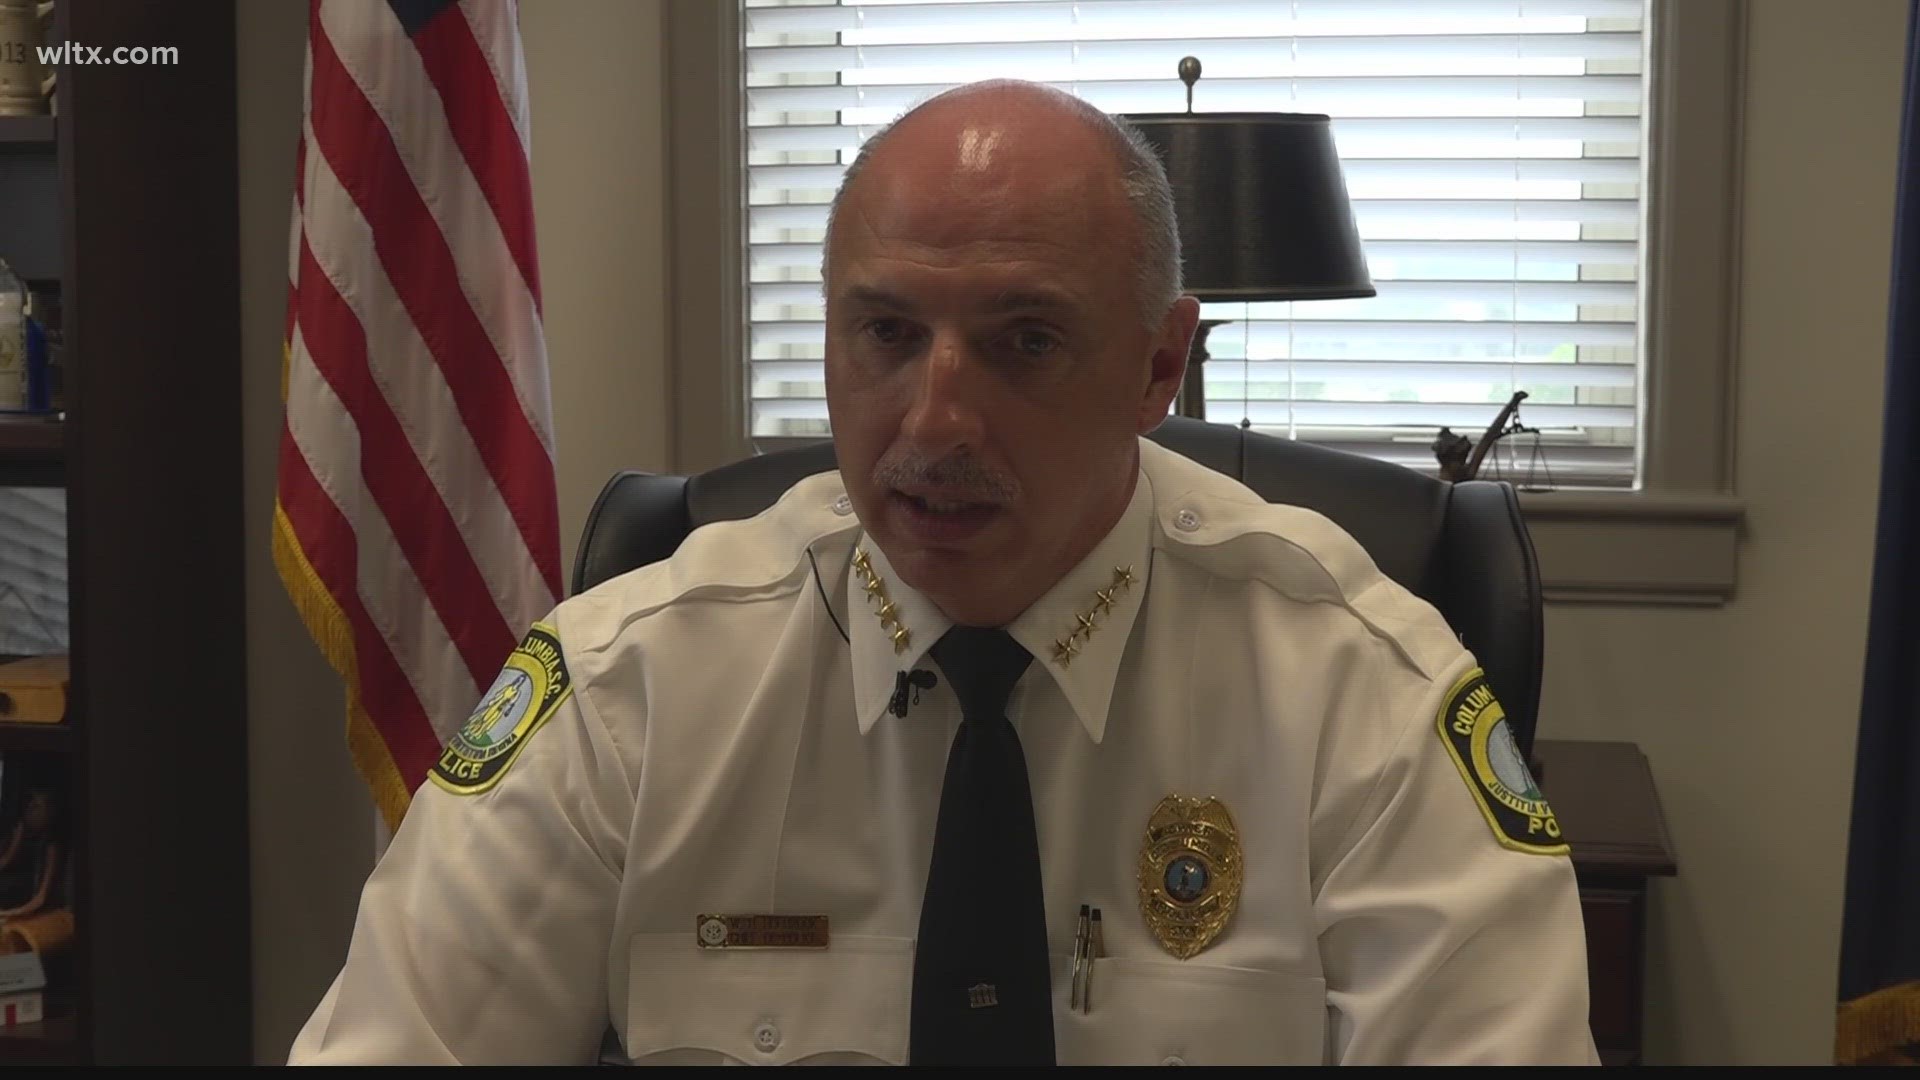 City of Columbia Police Chief Skip Holbrook talks to News19 about budget expenditures, body cams and more